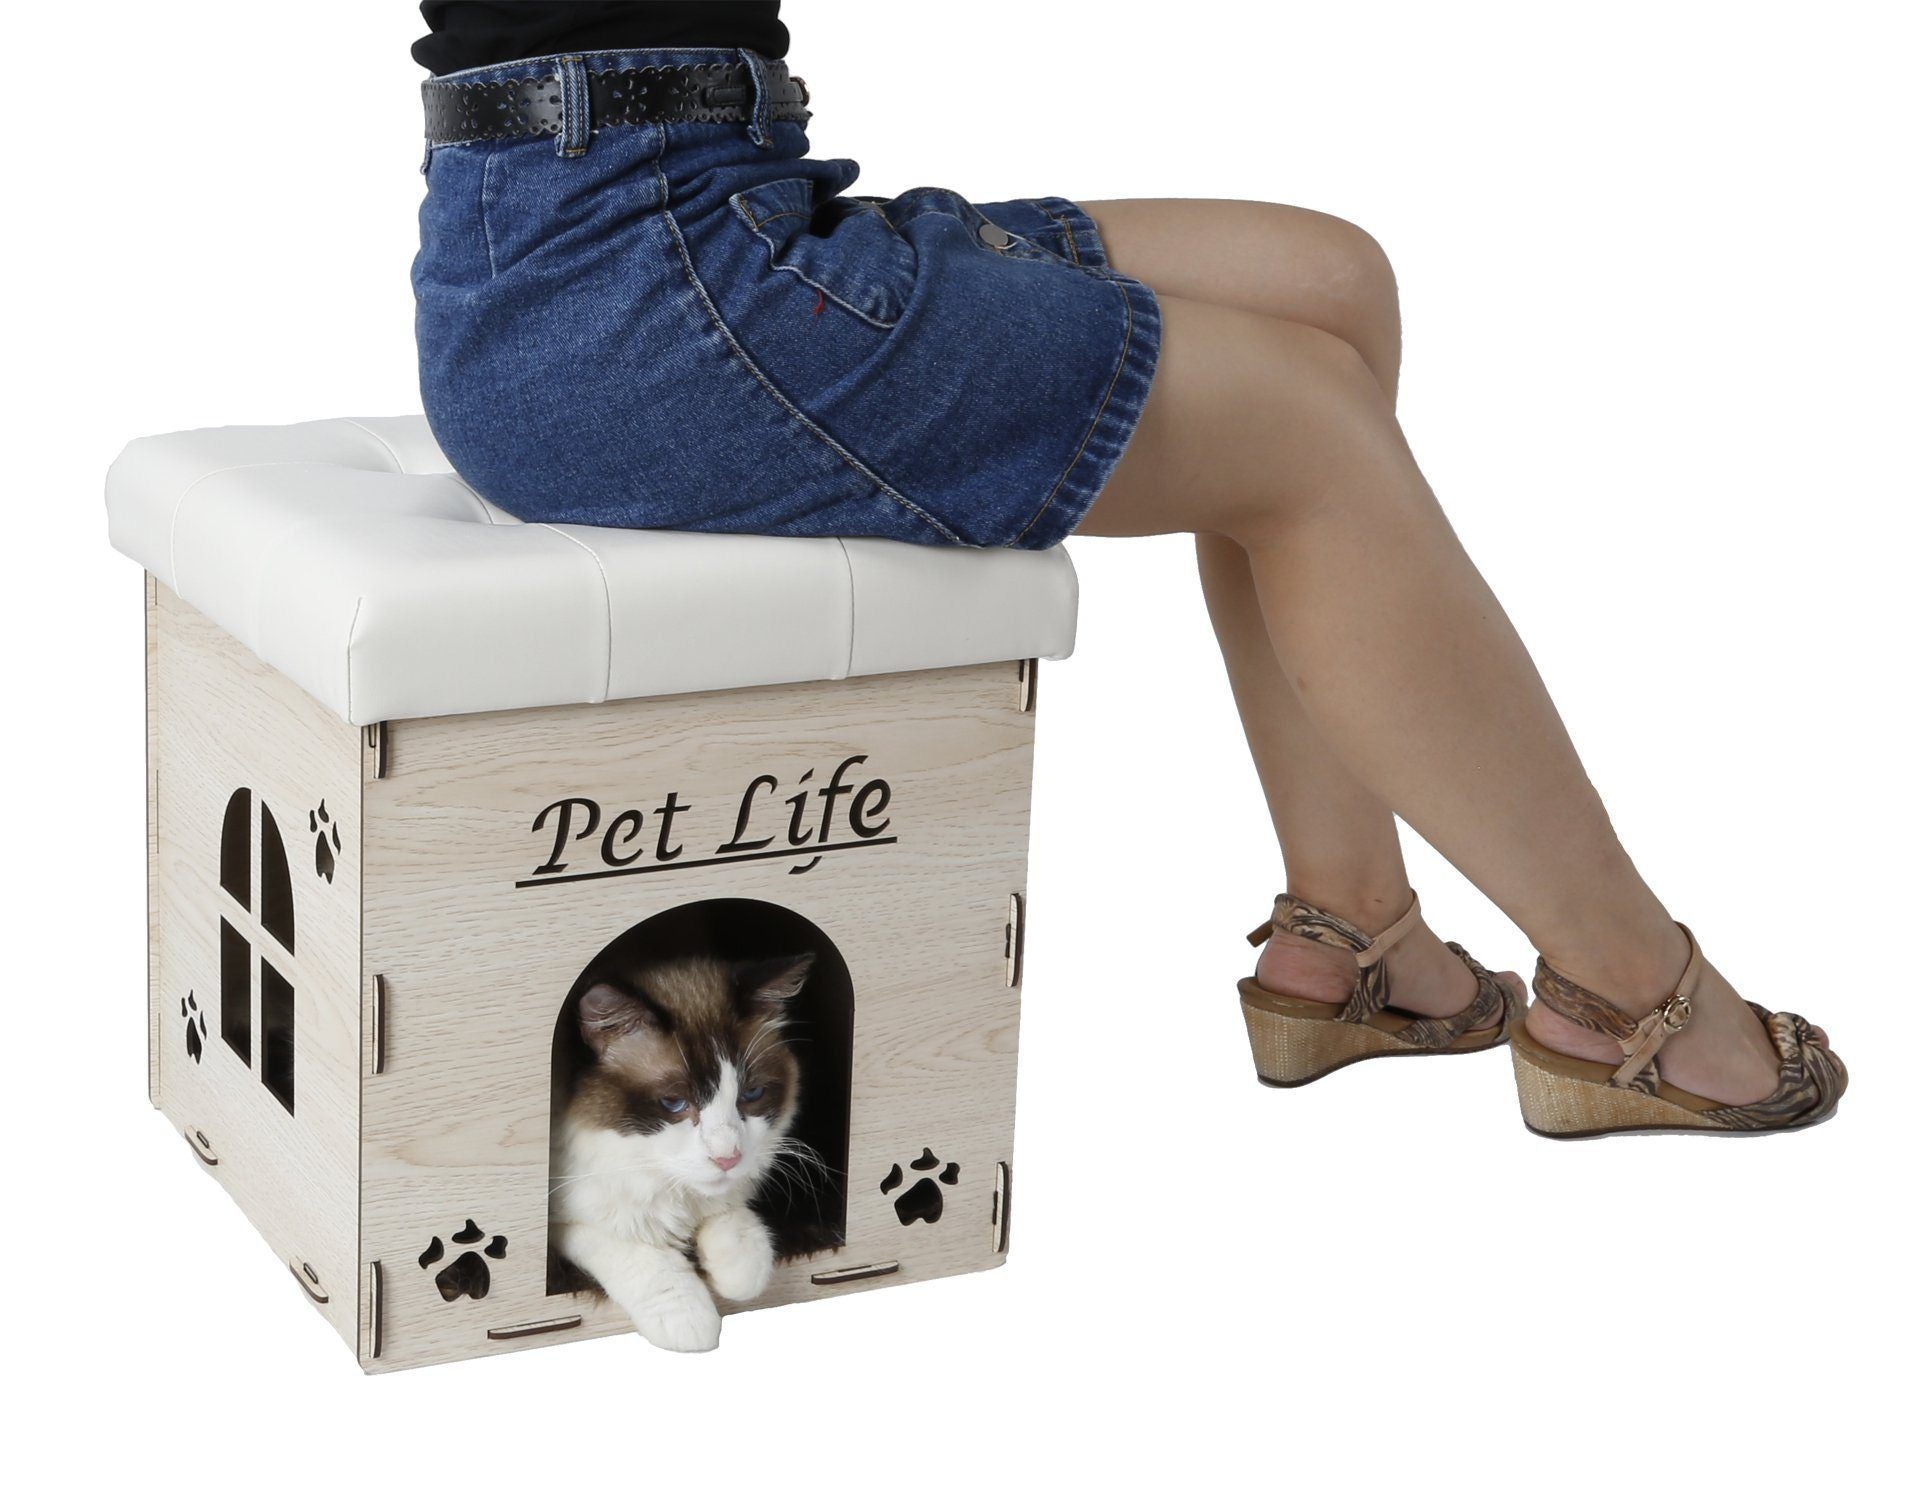 Pet Life ® 'Kitty Kallapse' Collapsible Folding Kitty Cat House Tree Bed Ottoman Bench Furniture  